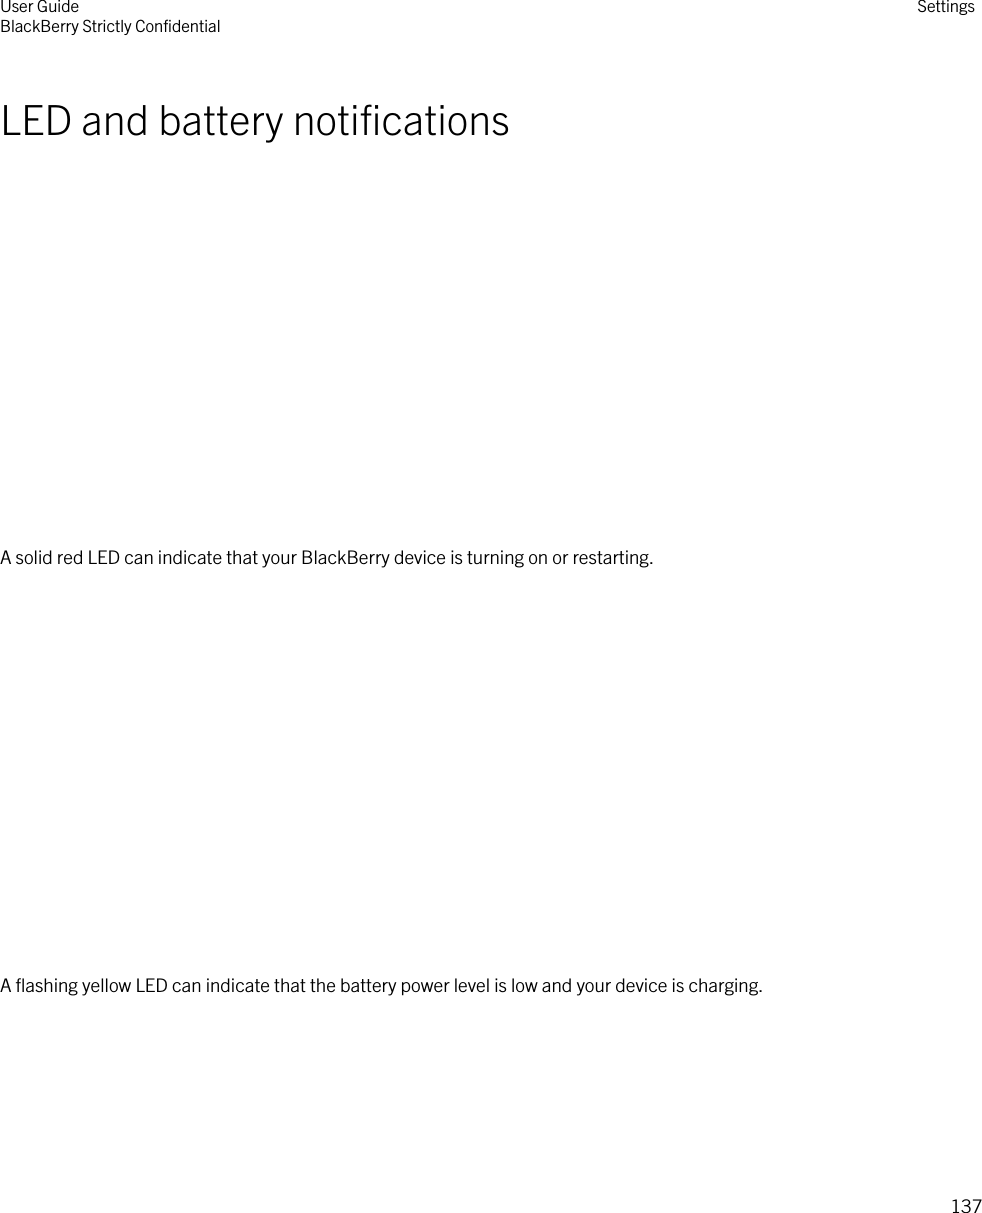 LED and battery notifications  A solid red LED can indicate that your BlackBerry device is turning on or restarting.  A flashing yellow LED can indicate that the battery power level is low and your device is charging. User GuideBlackBerry Strictly Confidential Settings137